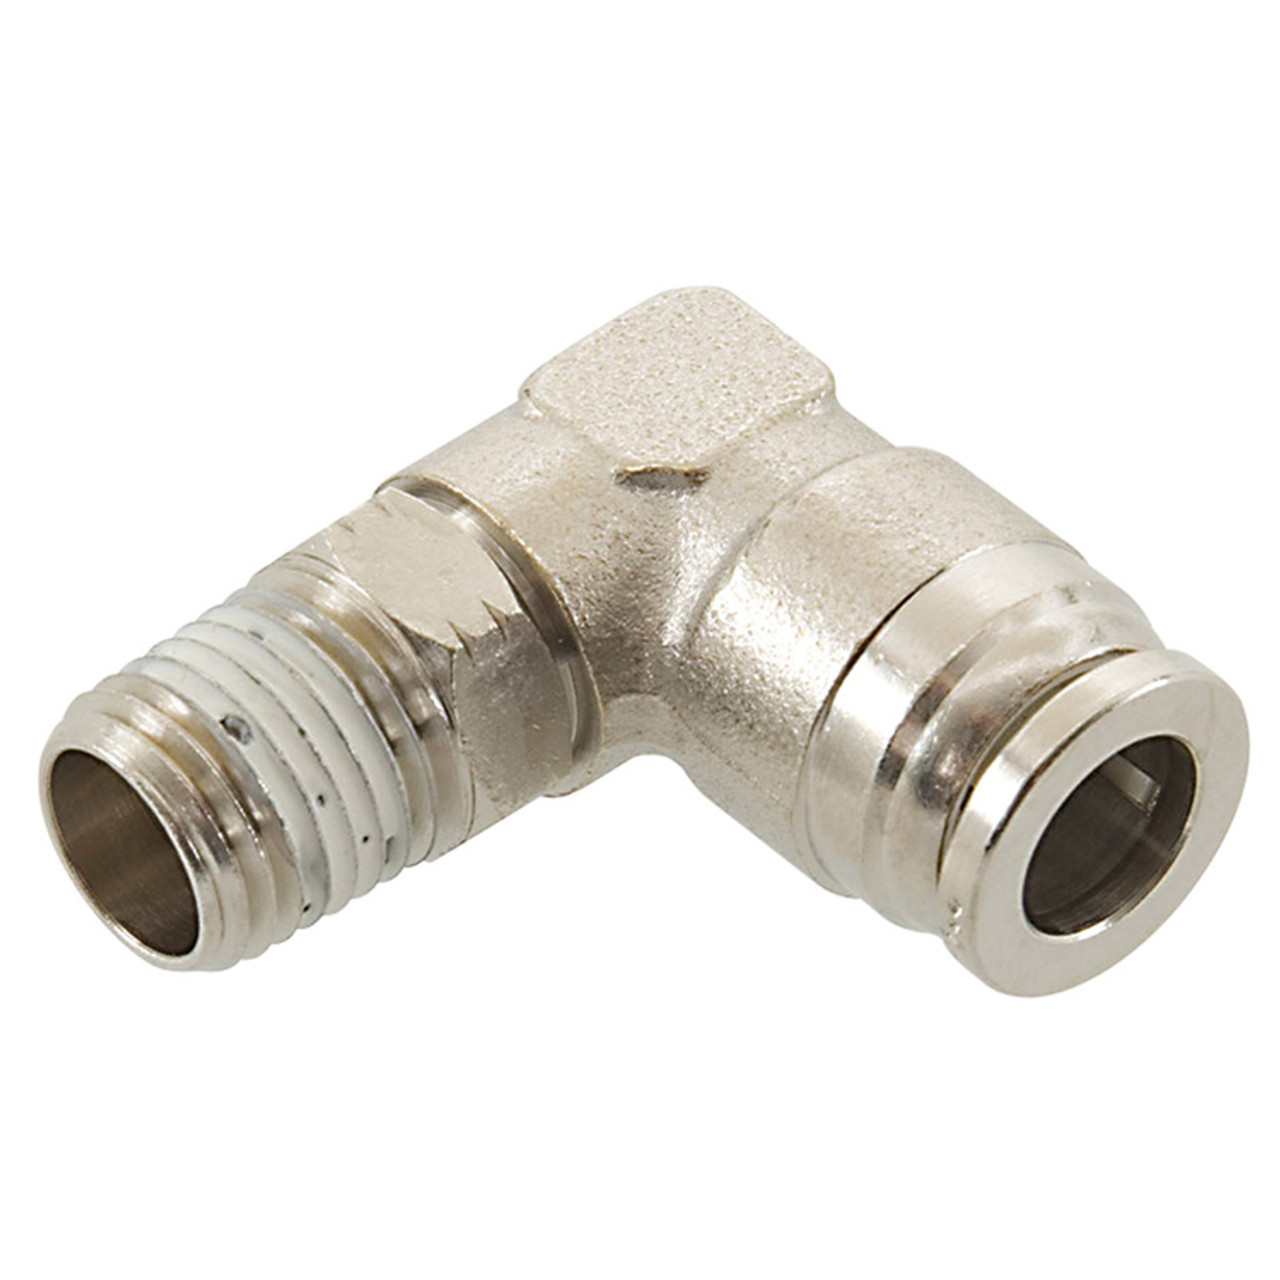 1/8 x 1/8" Nickel Plated Brass Male NPT - Push-To-Connect 90° Elbow   G6096P-02-02